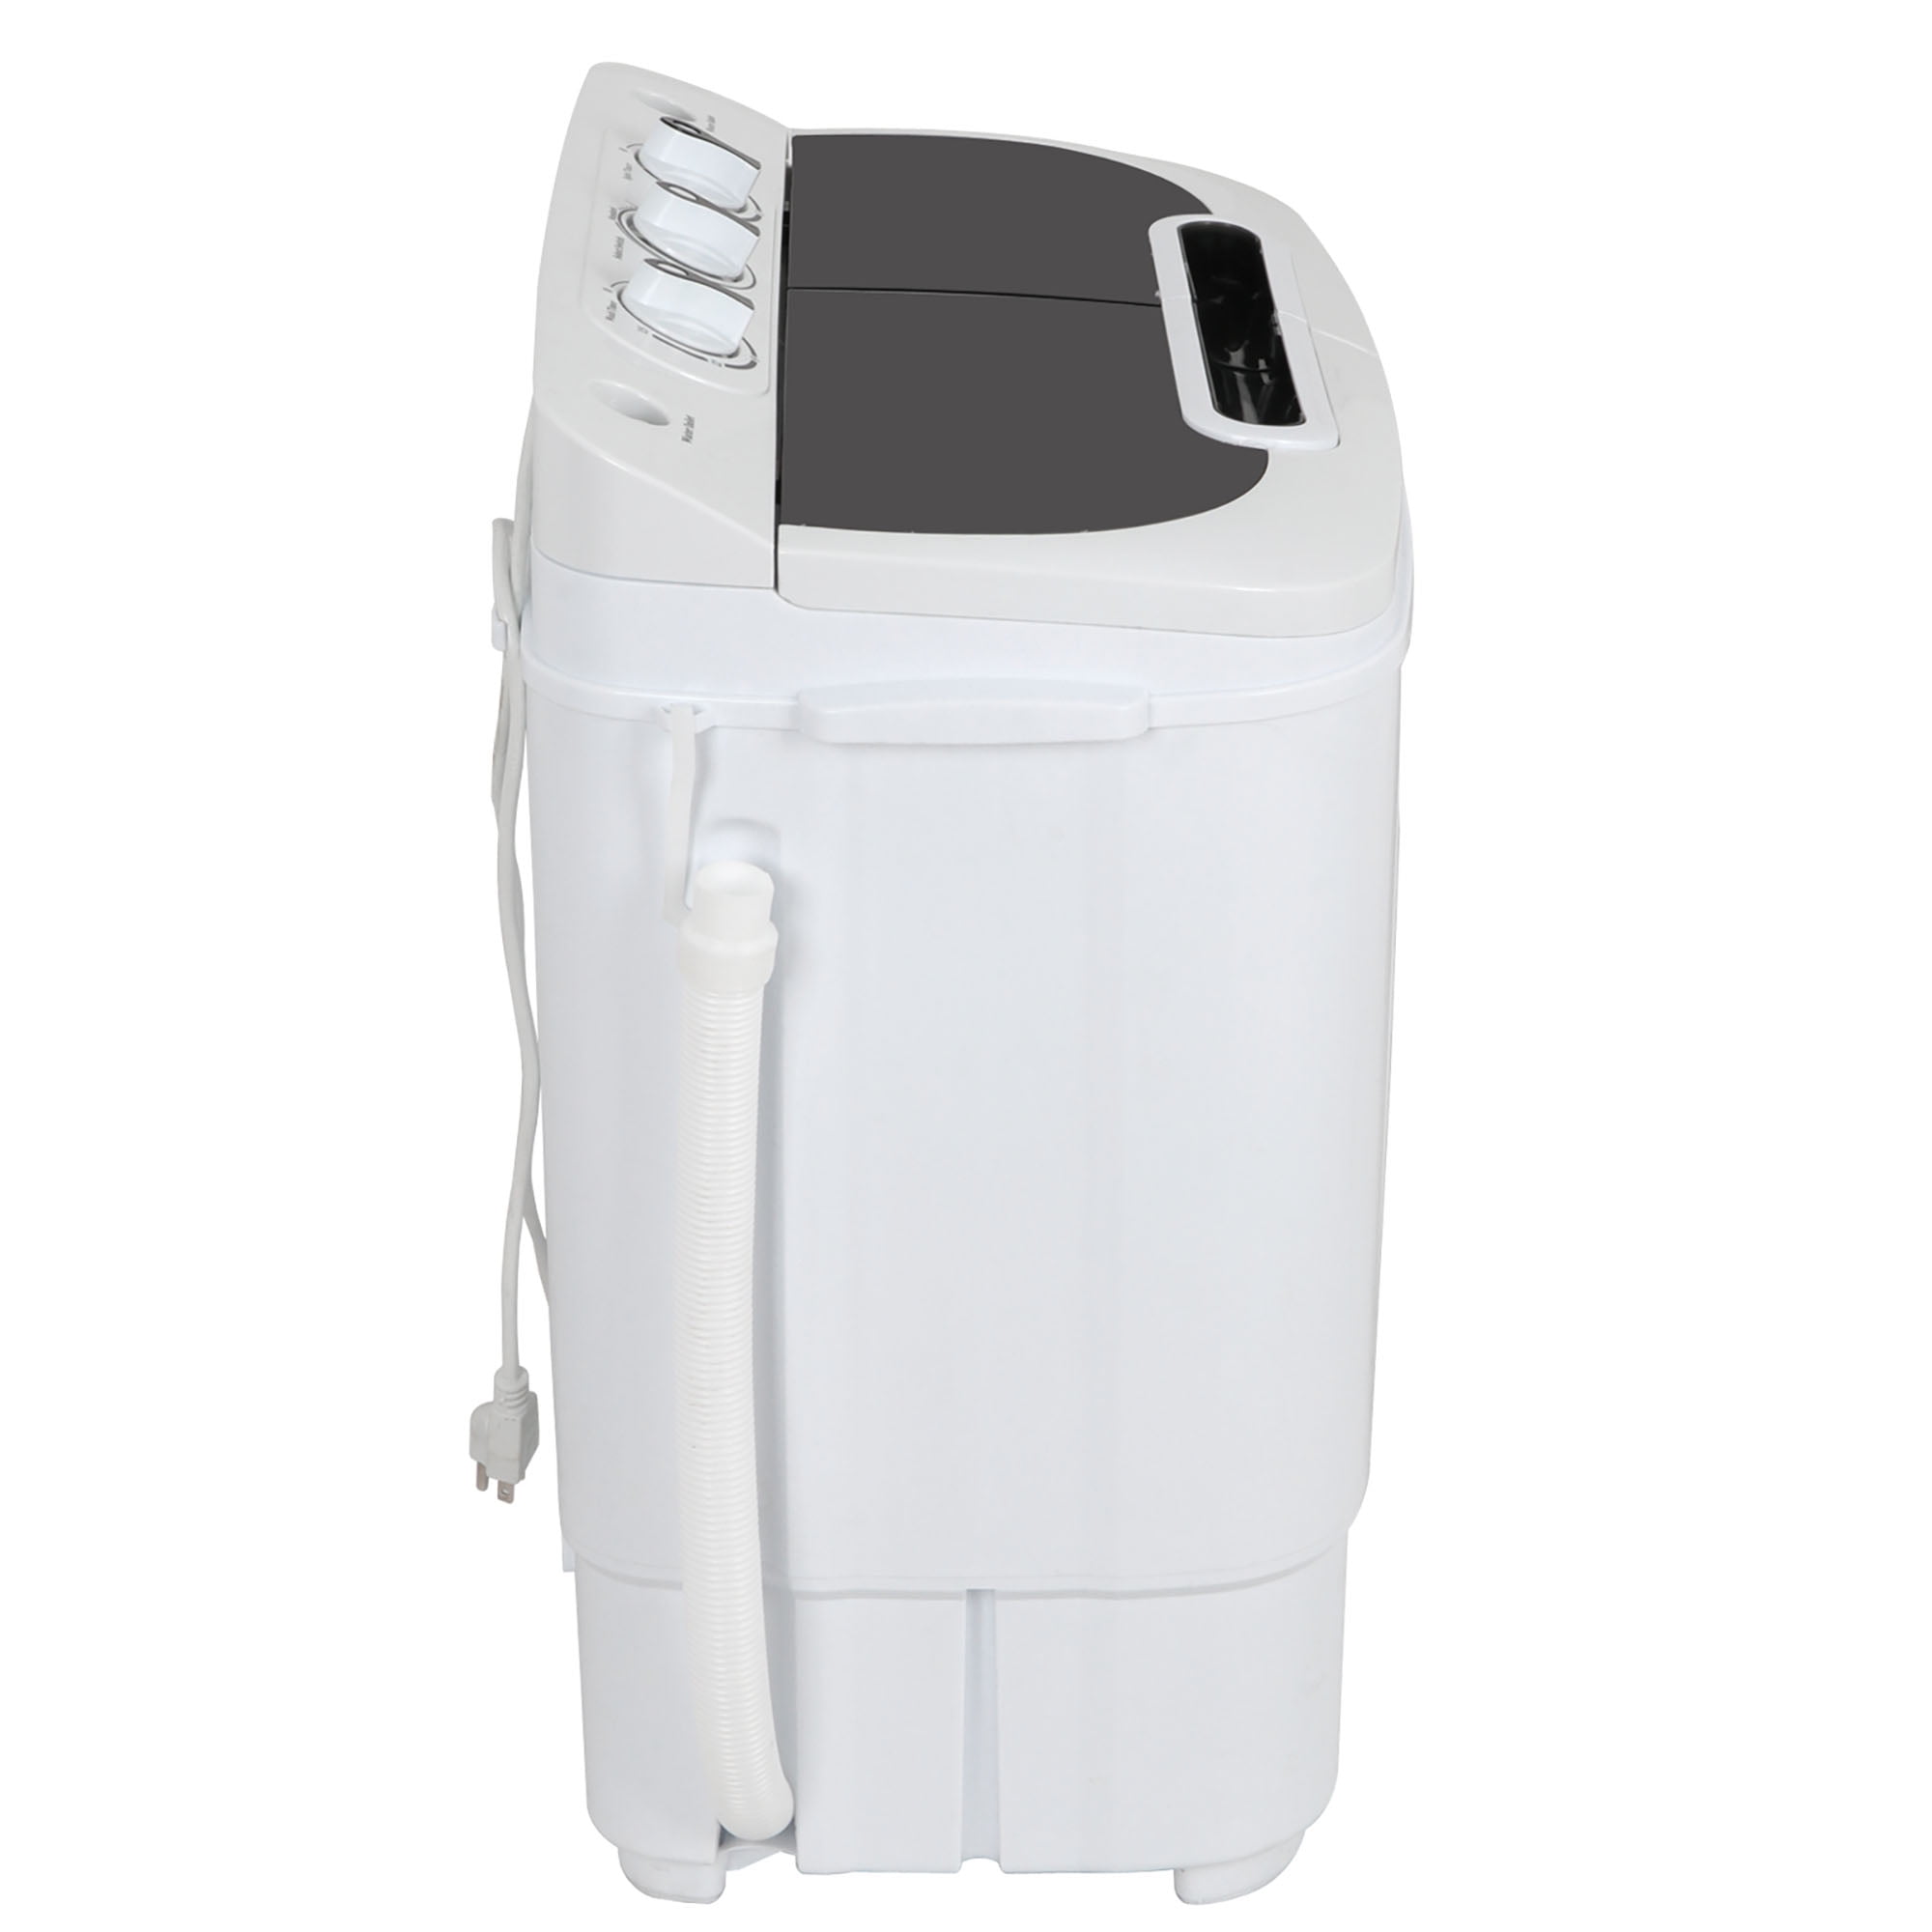 ZenStyle Portable Washer Compact Twin Tub 9.9 LB Indonesia